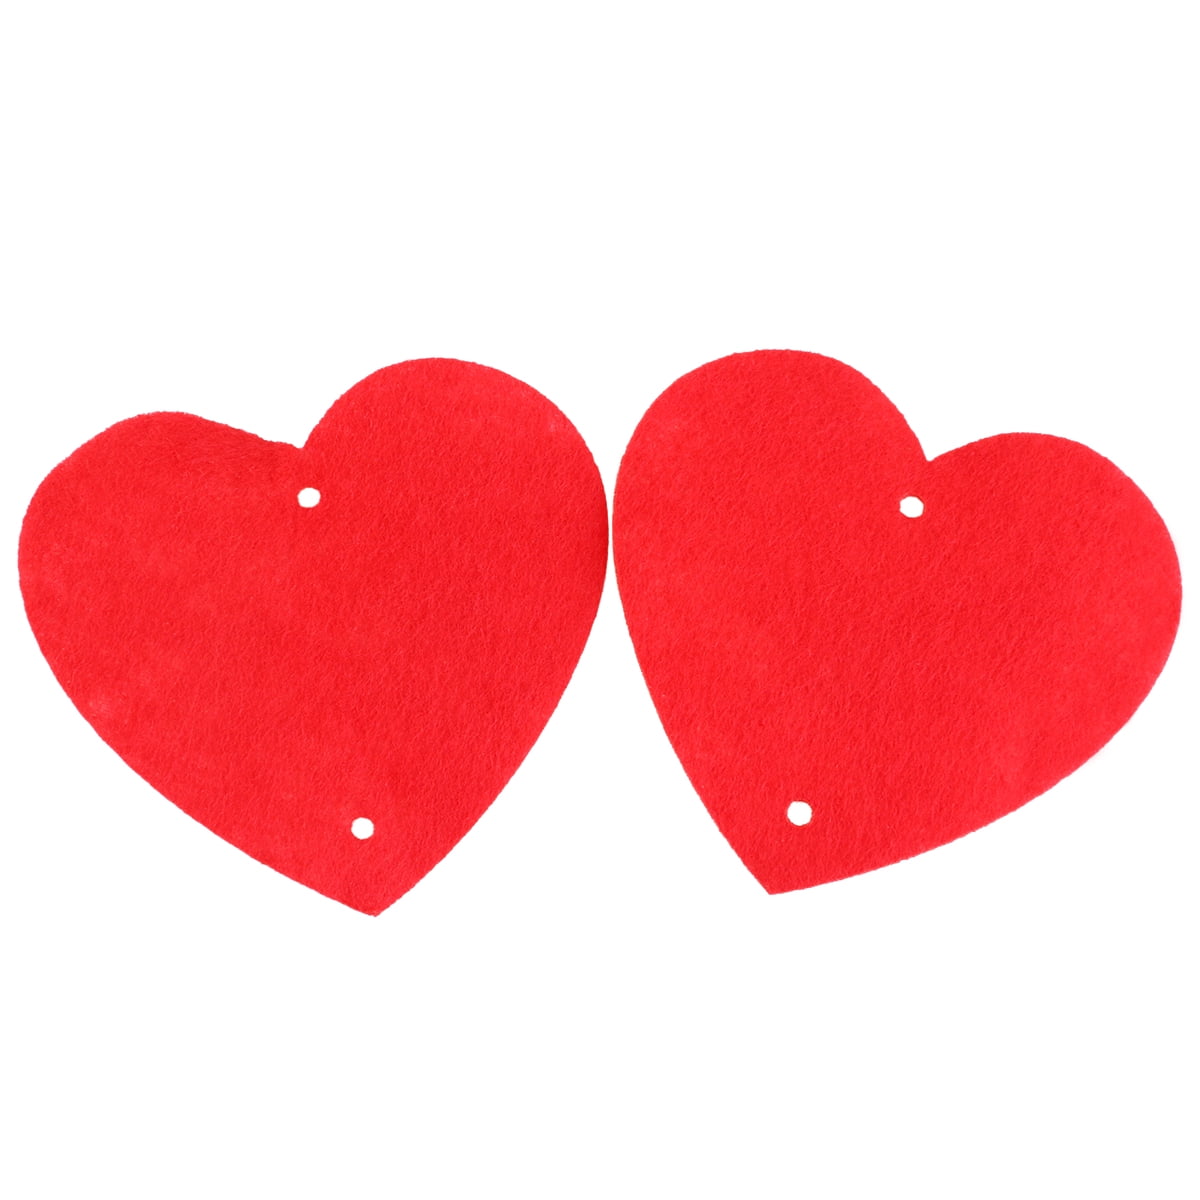 16PCS Valentine's Day Decorations Red Love Heart Hanging Ornaments Party Decor 